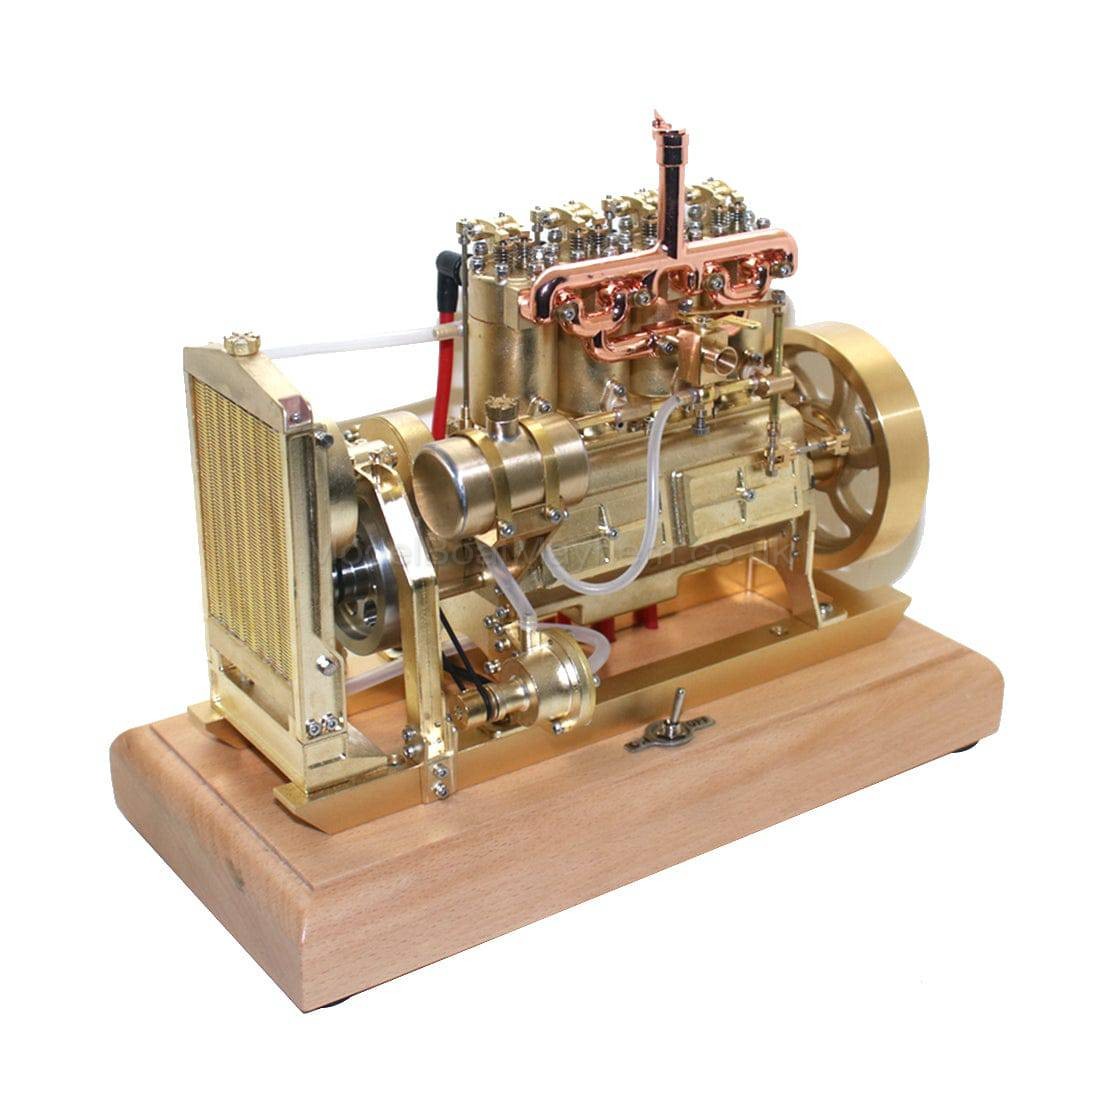 stirlingkit-holt-h75-tractor-engine-gas-12cc-four-cylinder-ohv-engine-scale-model-with-governor_2_2c40c79e-66b9-45e2-9ebc-68b910ab2c94_1100x.jpg" border="0